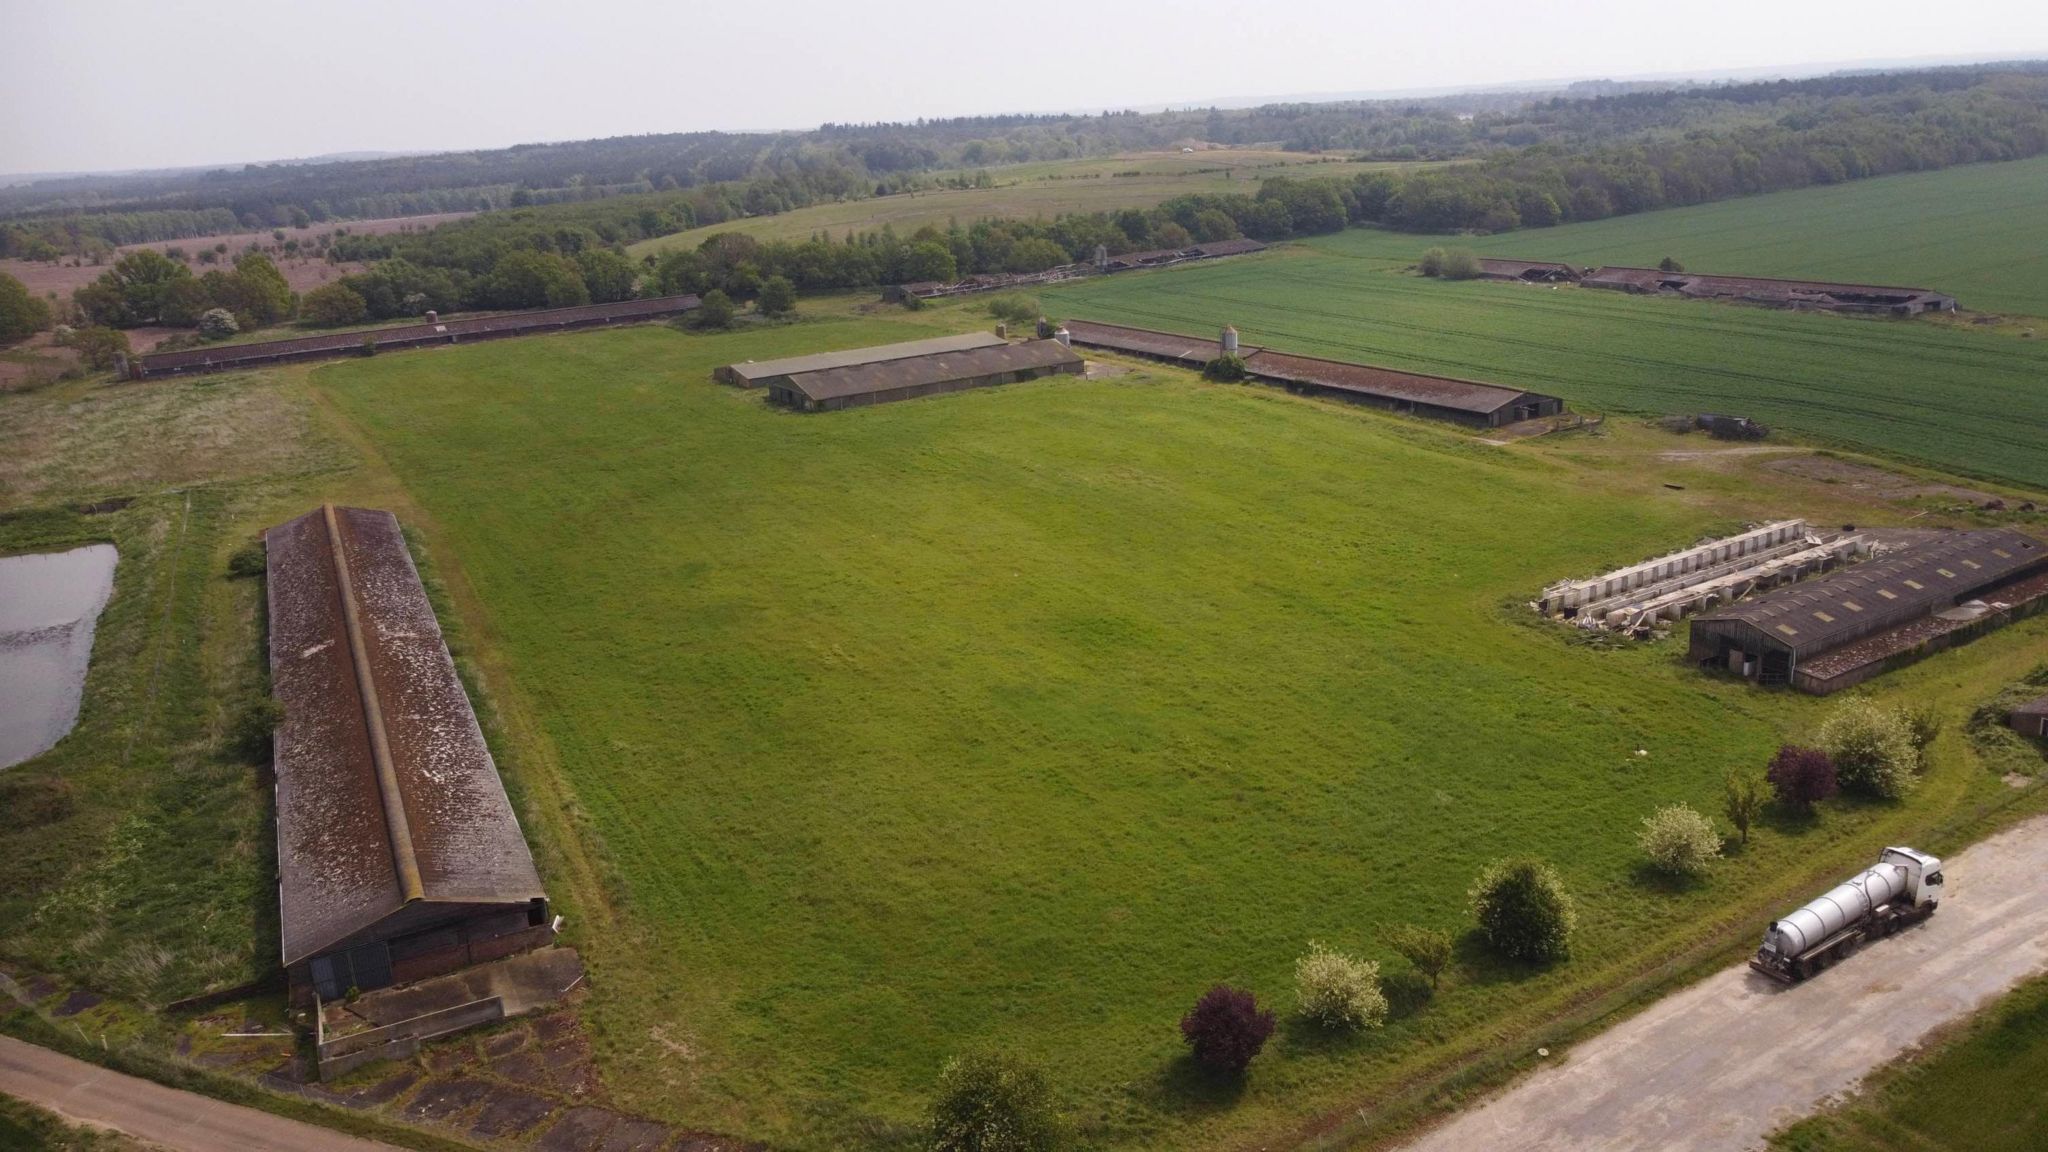 The site as it is now with old chicken sheds on the land